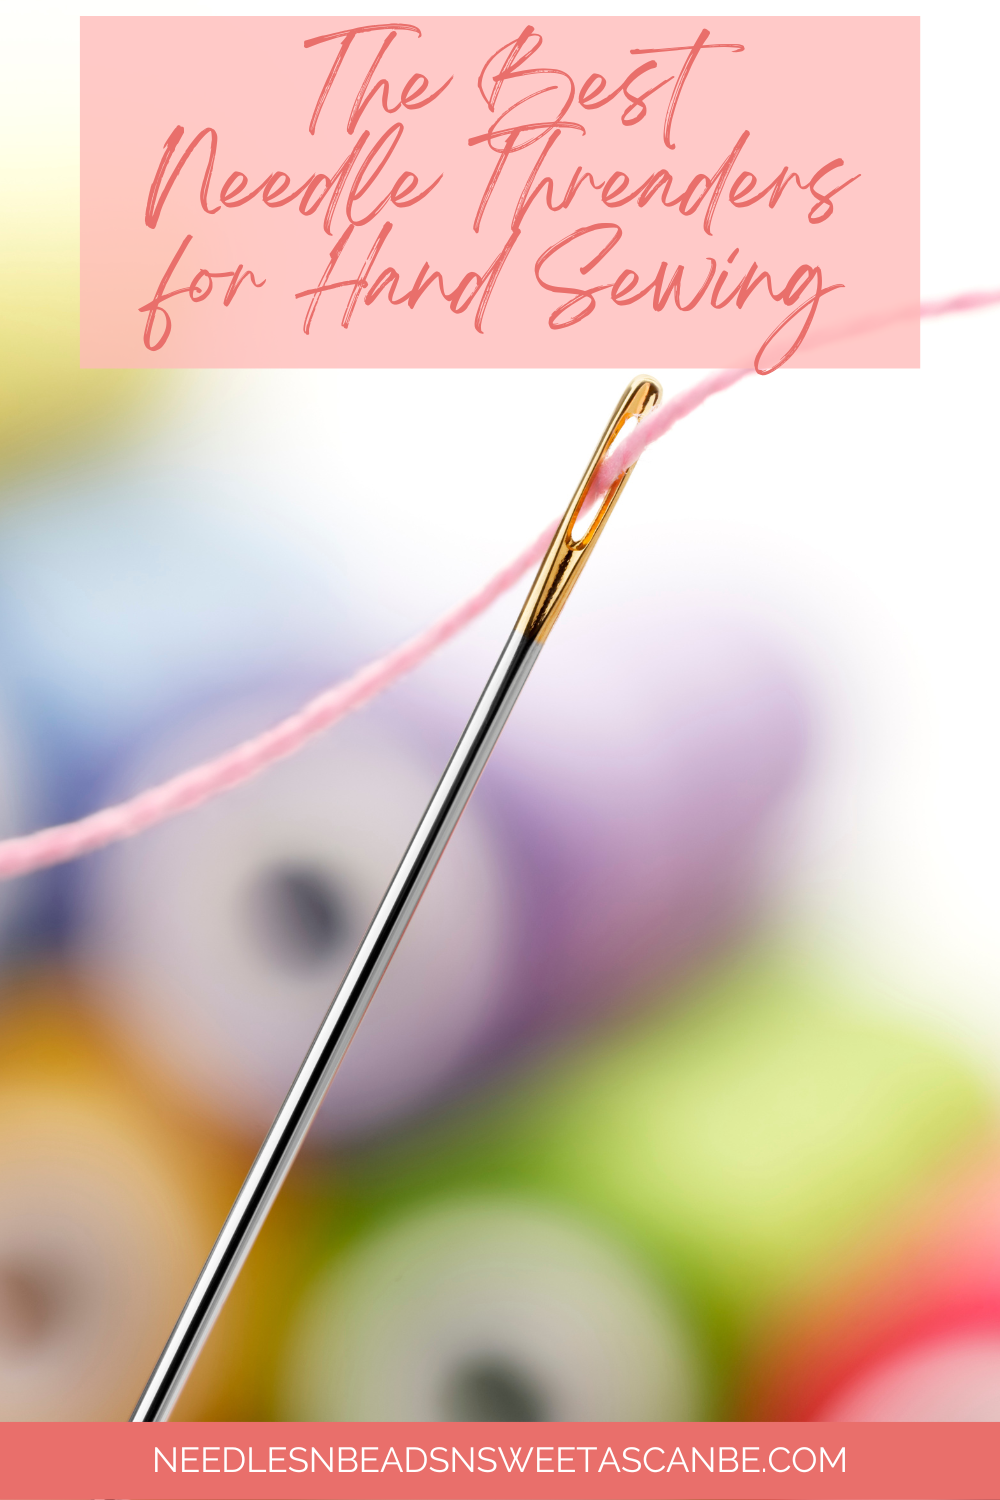 What are The Best Needle Threaders for Hand Sewing?